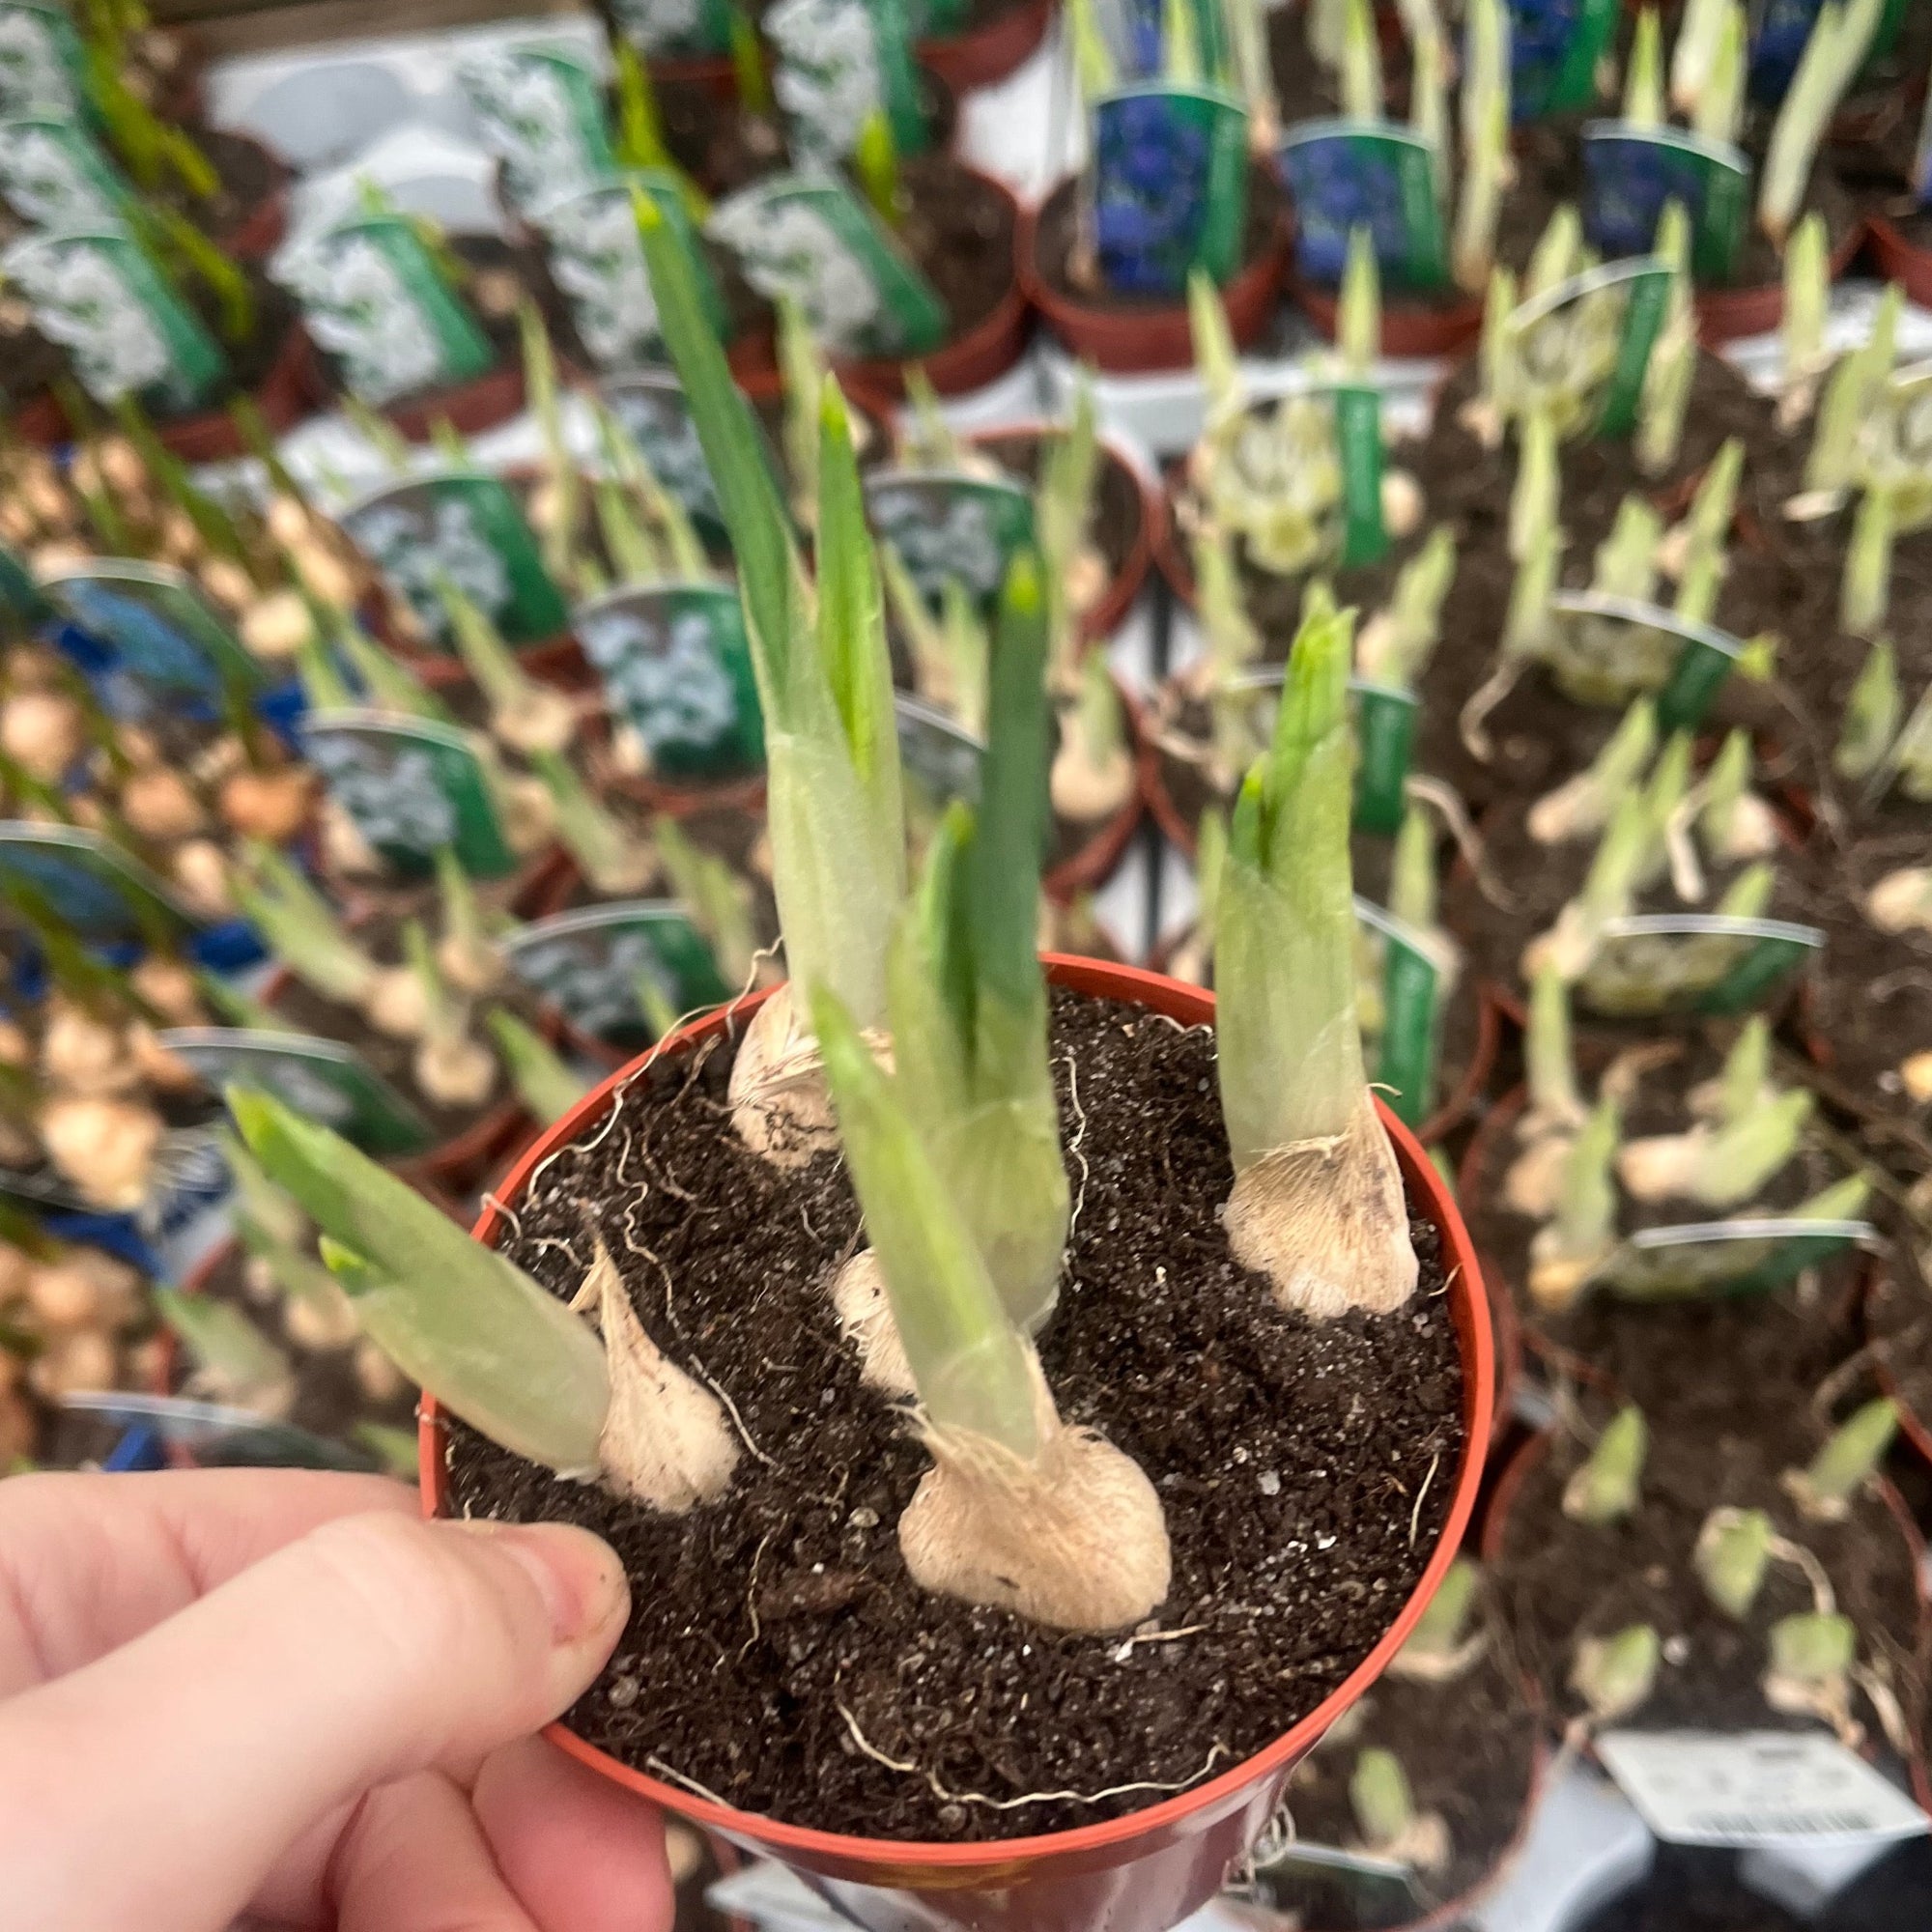 Our selection of 3 Potted Spring Bulbs